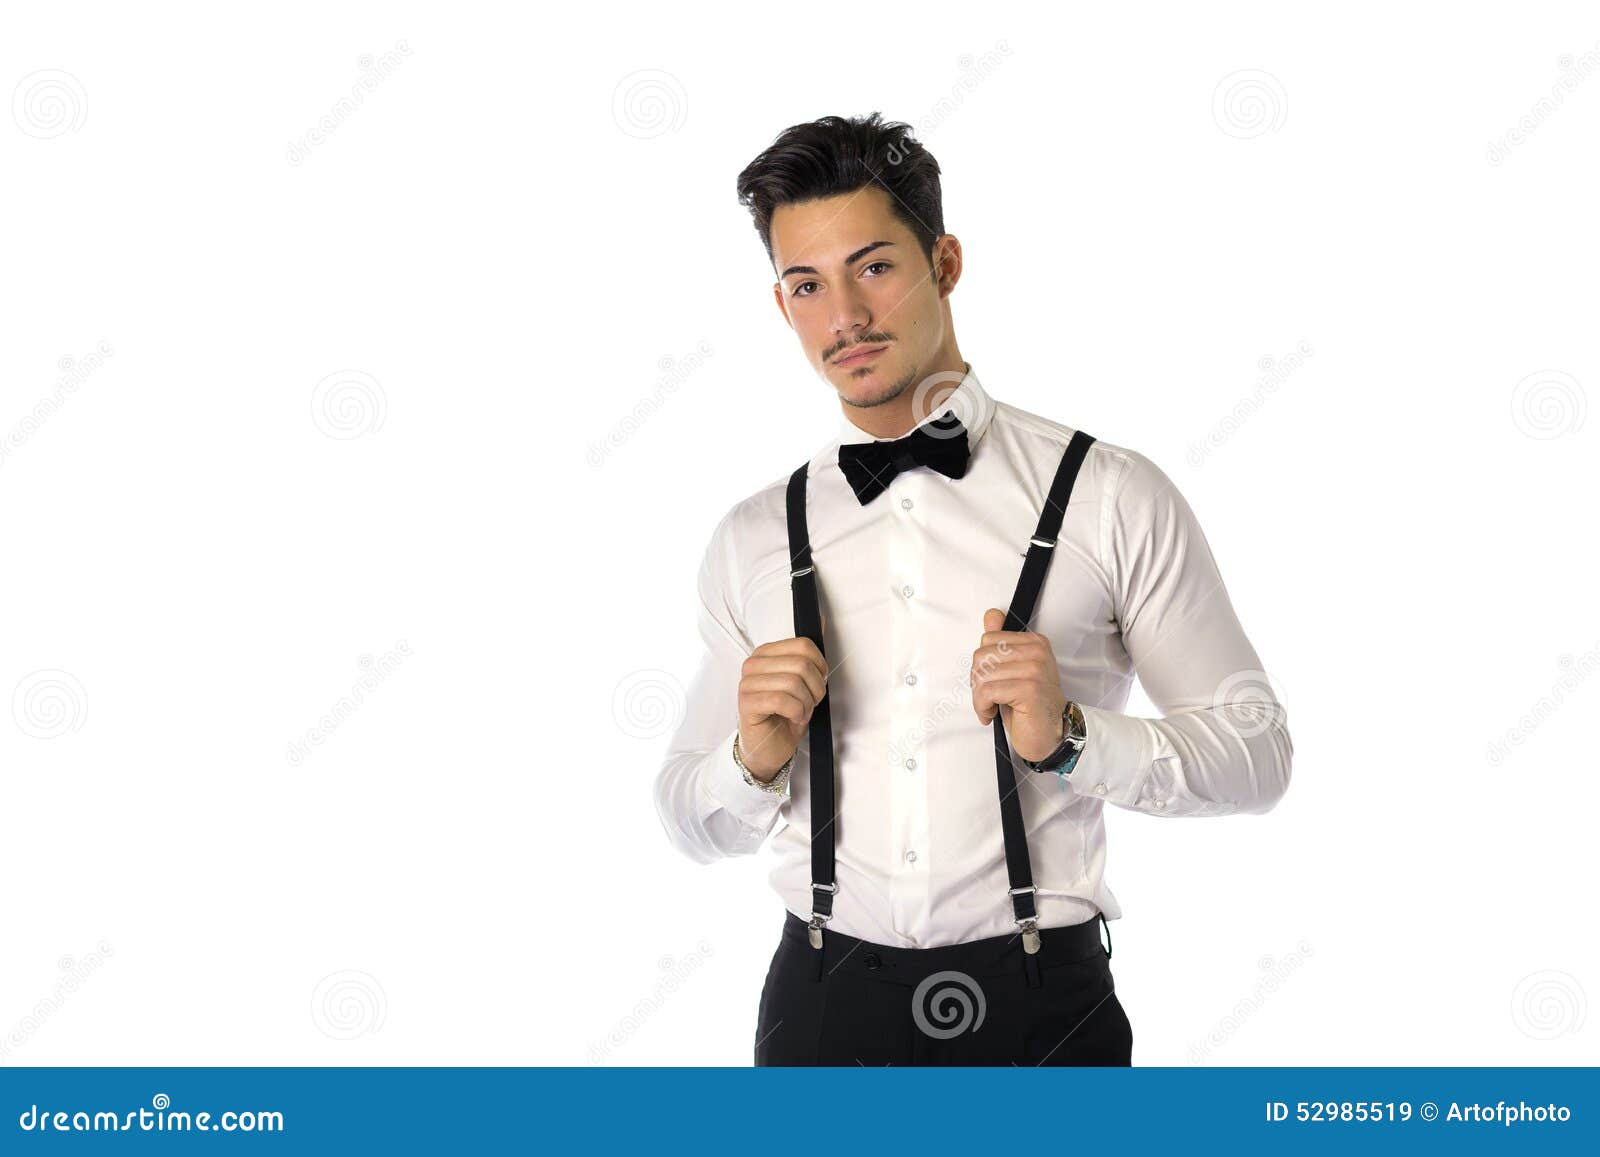 Handsome Elegant Young Man with Business Suit Stock Image - Image of ...